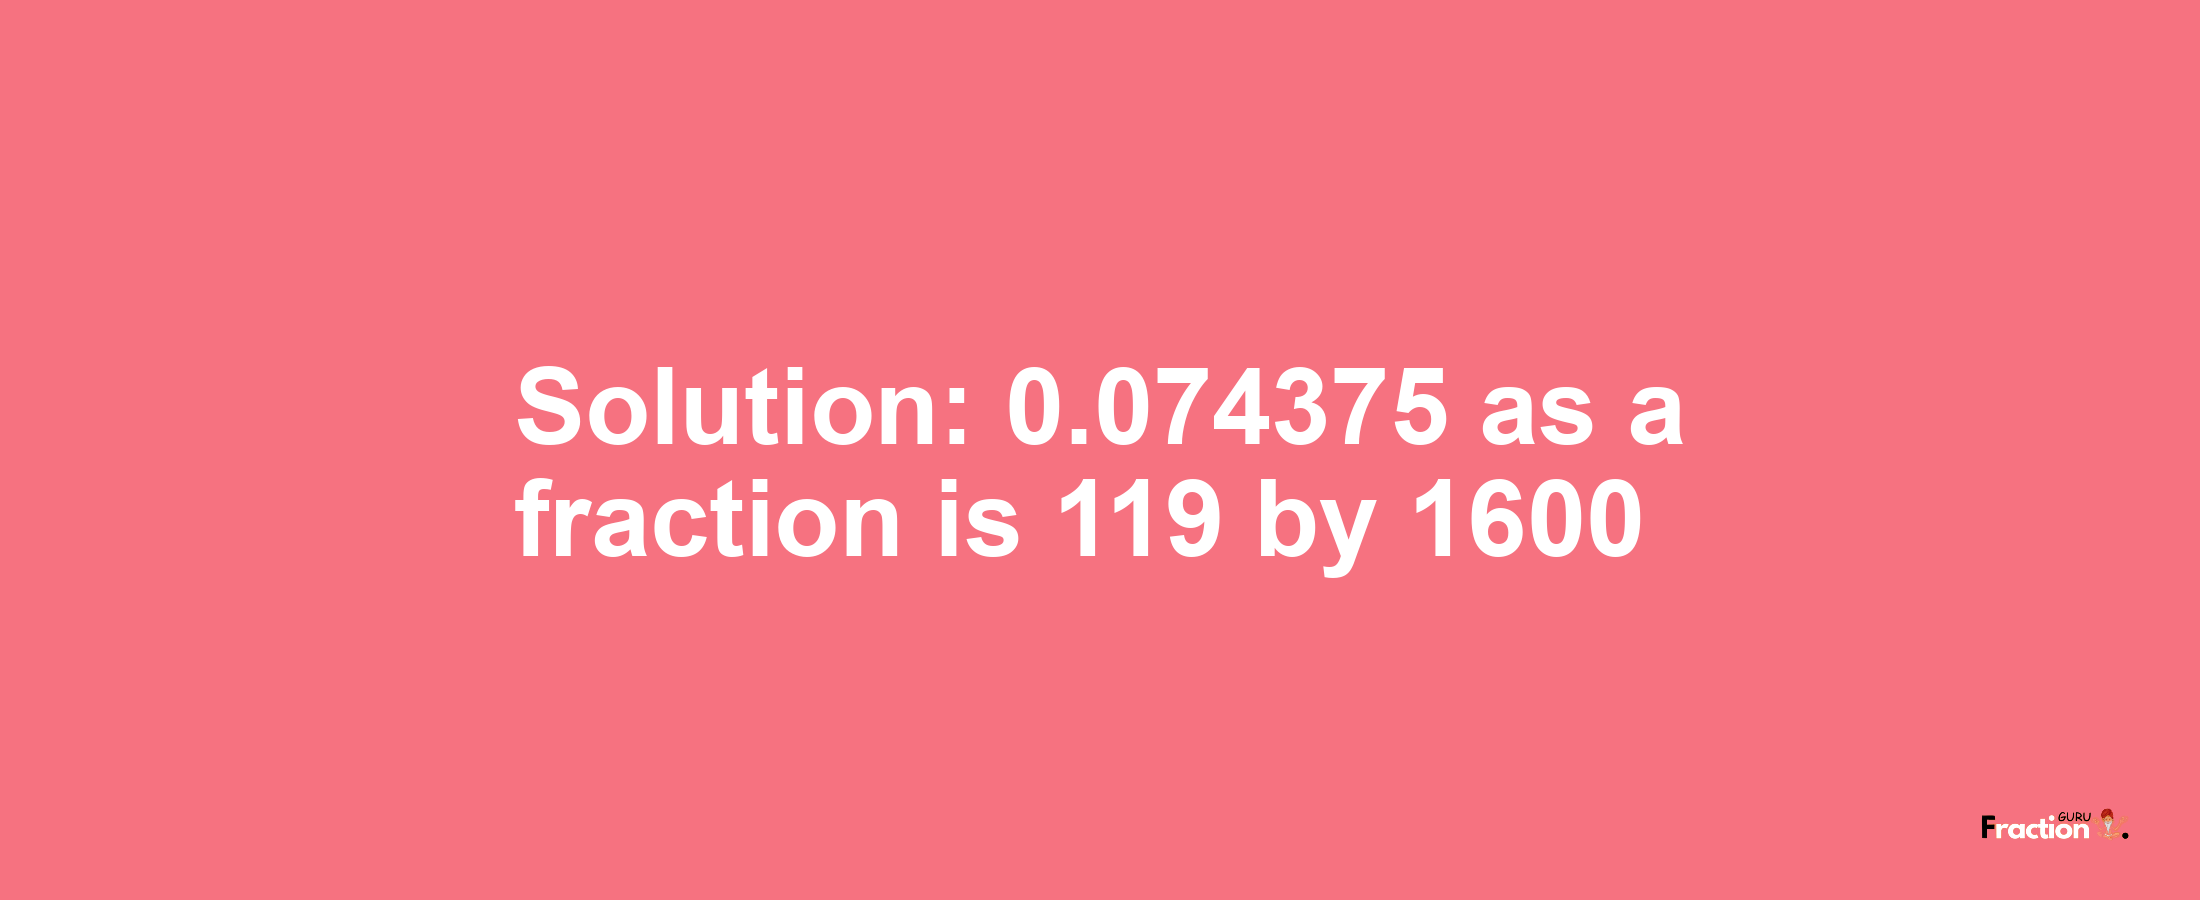 Solution:0.074375 as a fraction is 119/1600